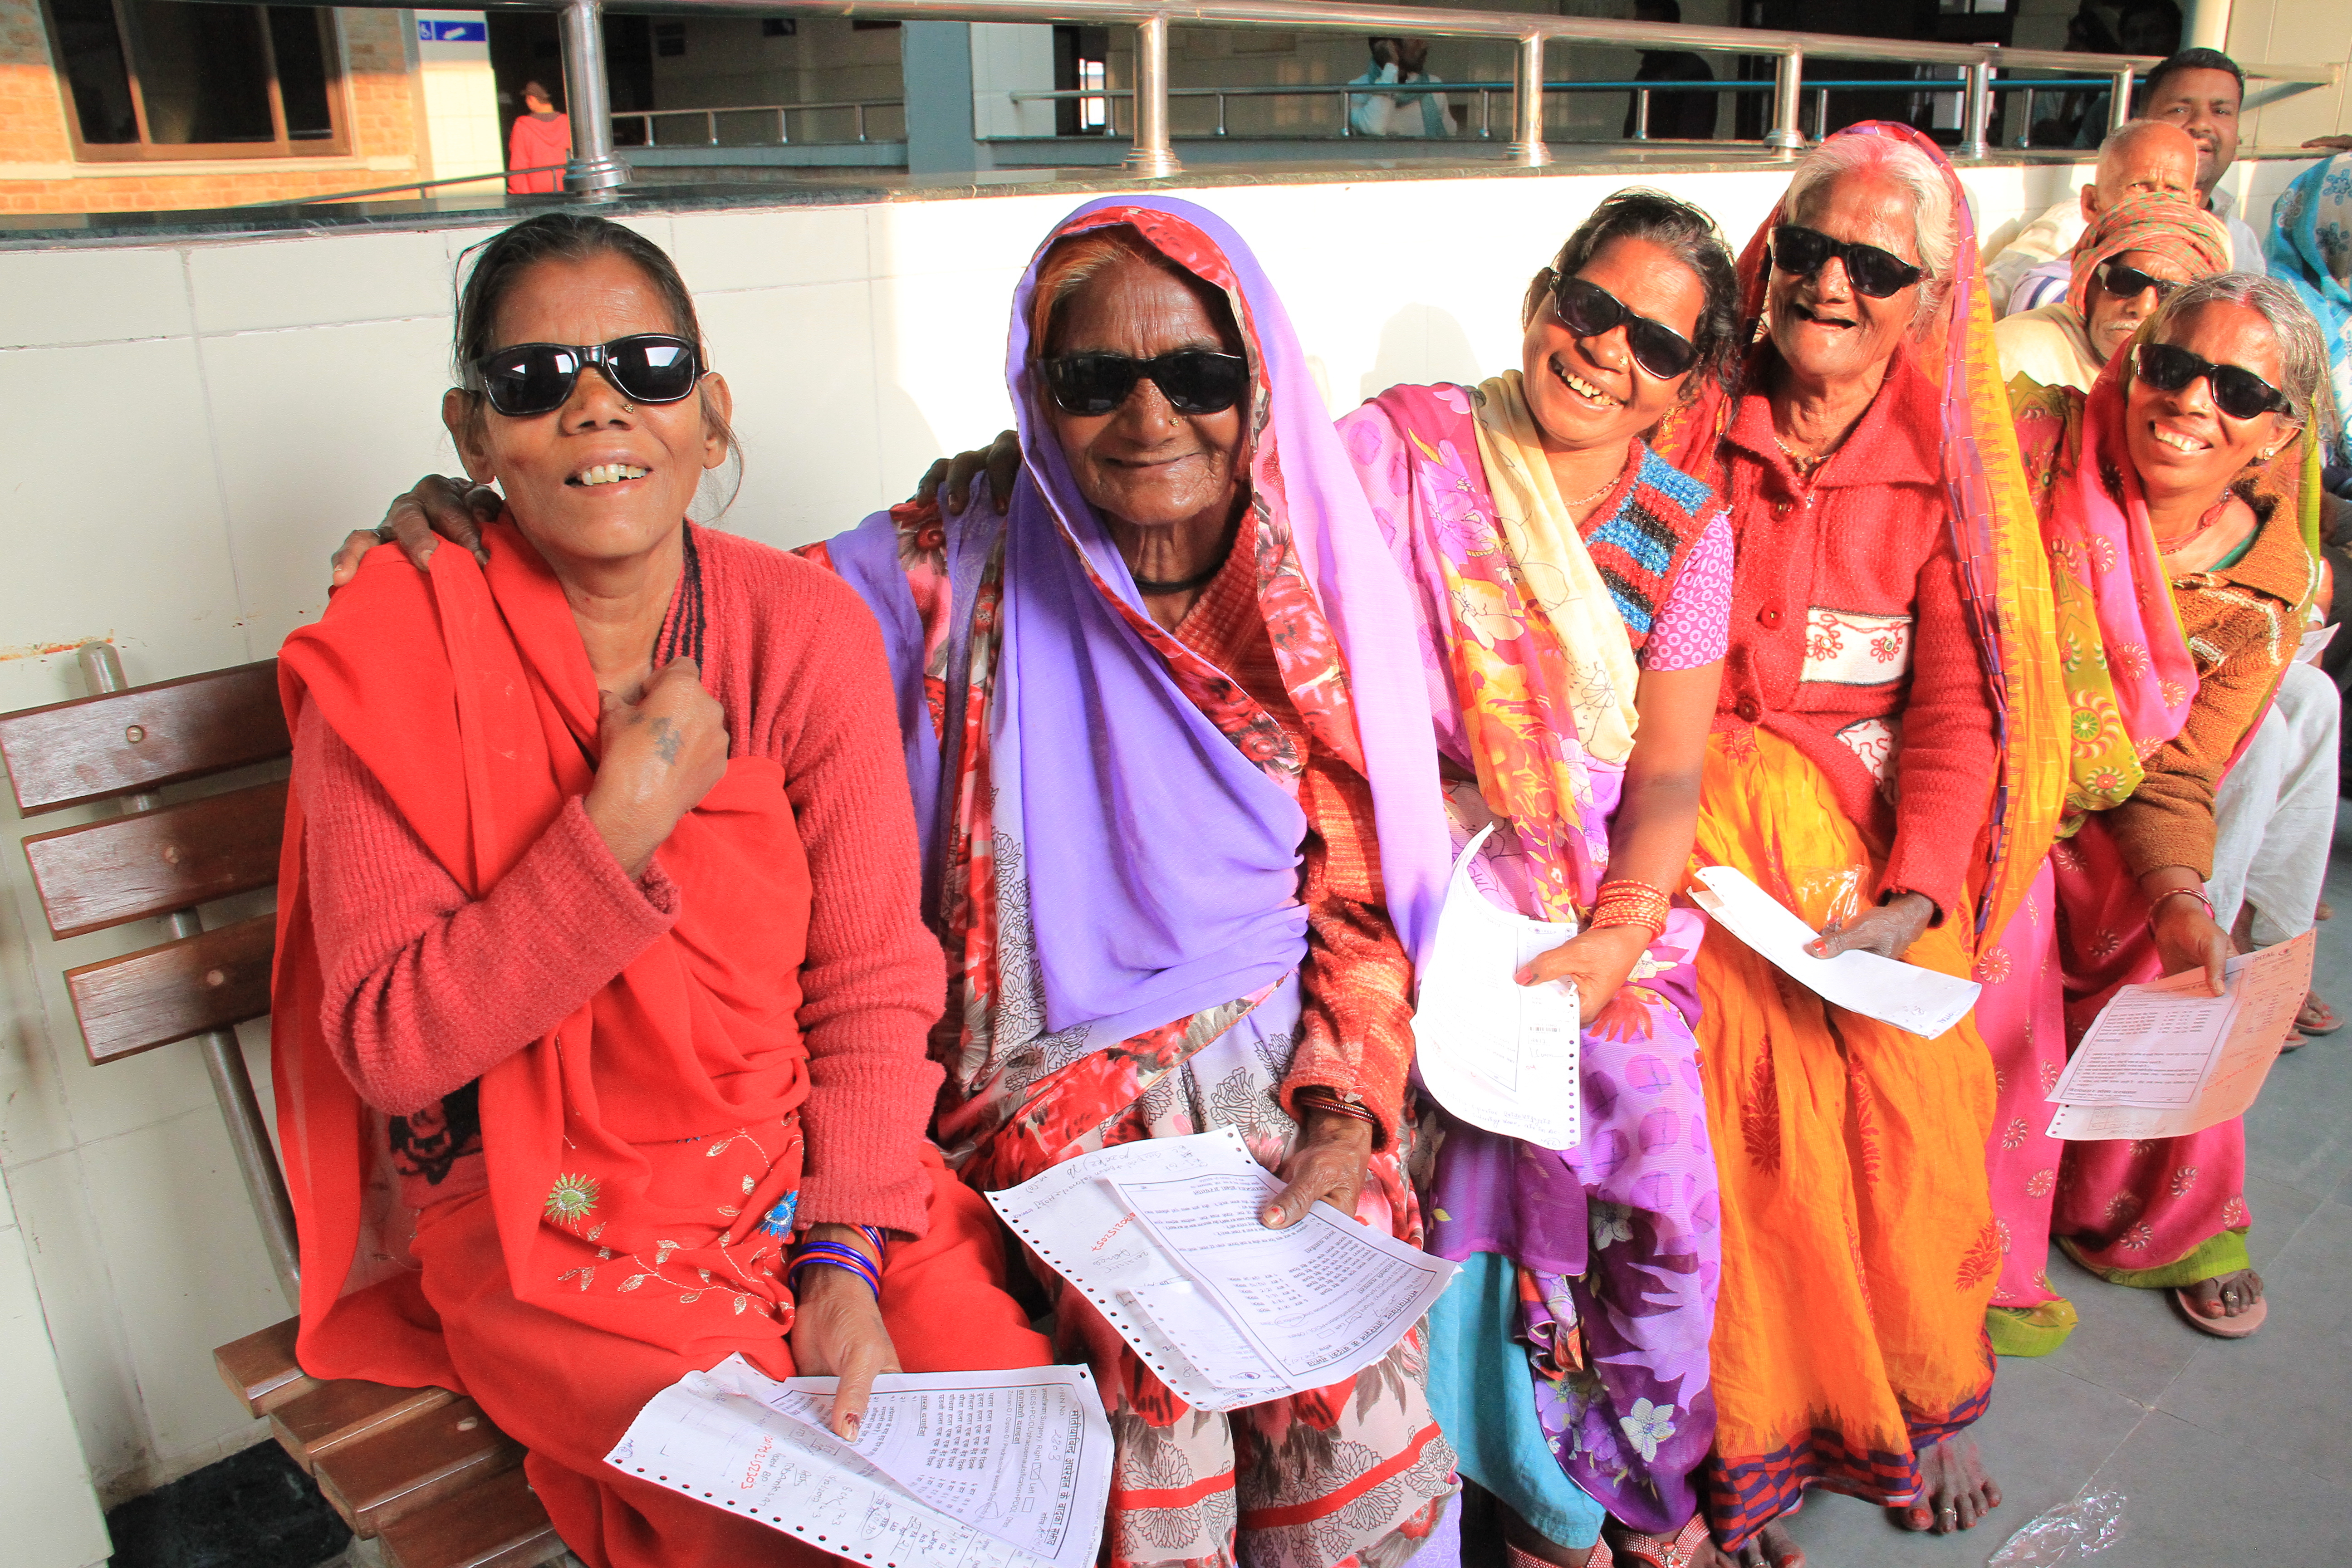 This image shows older women wearing colourful saris and sunglasses, sitting on a bench in a hospital and smiling at the camera.